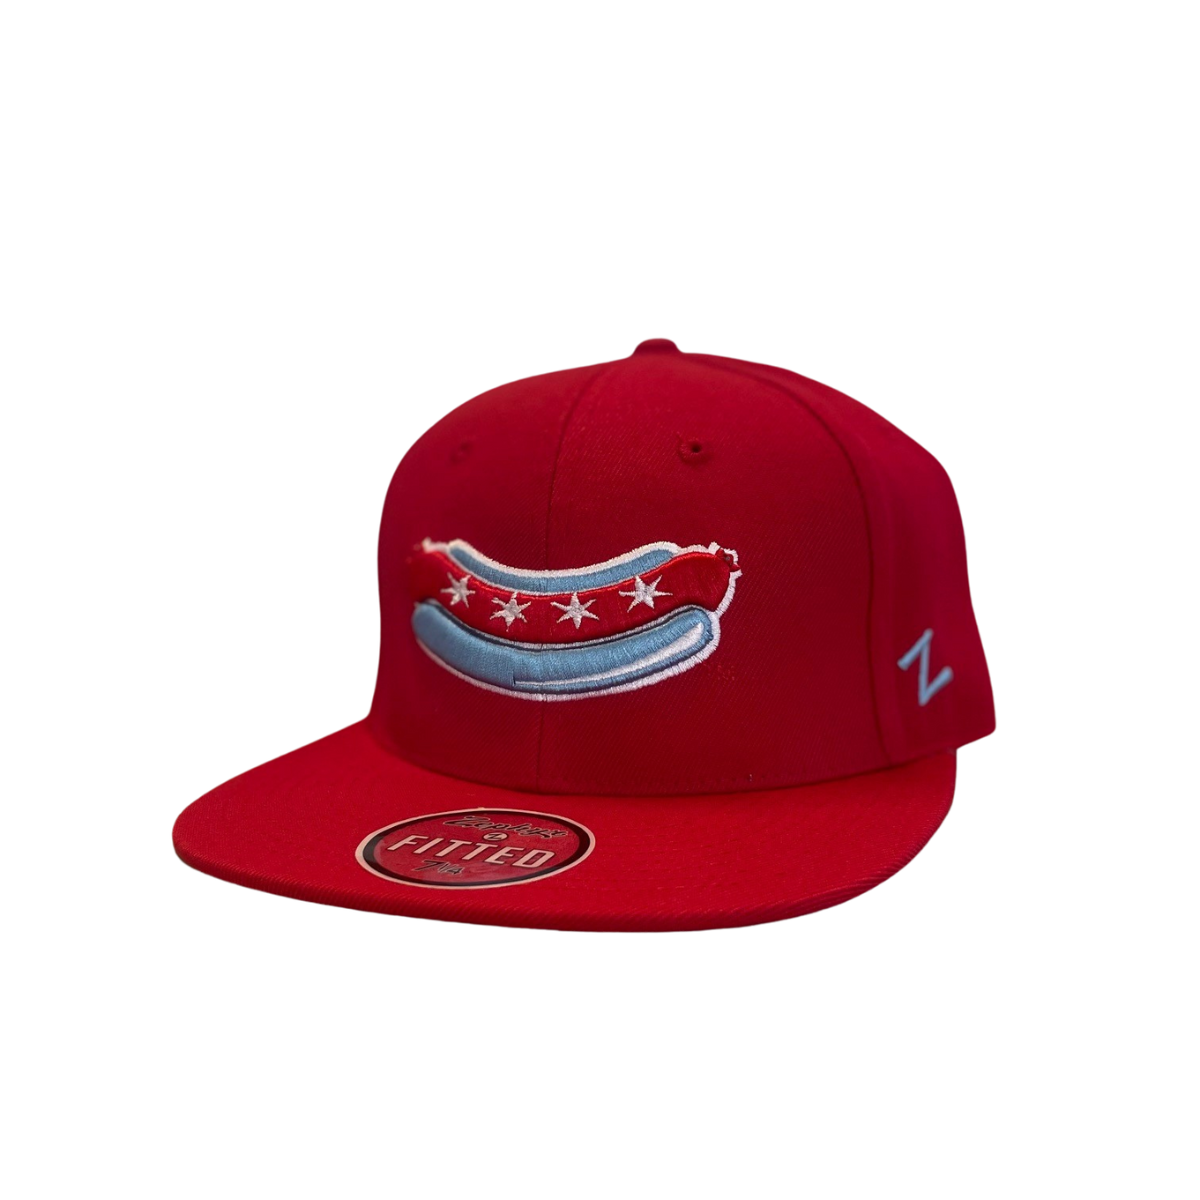 CHICAGO DOGS HAT FITTED HOME RED